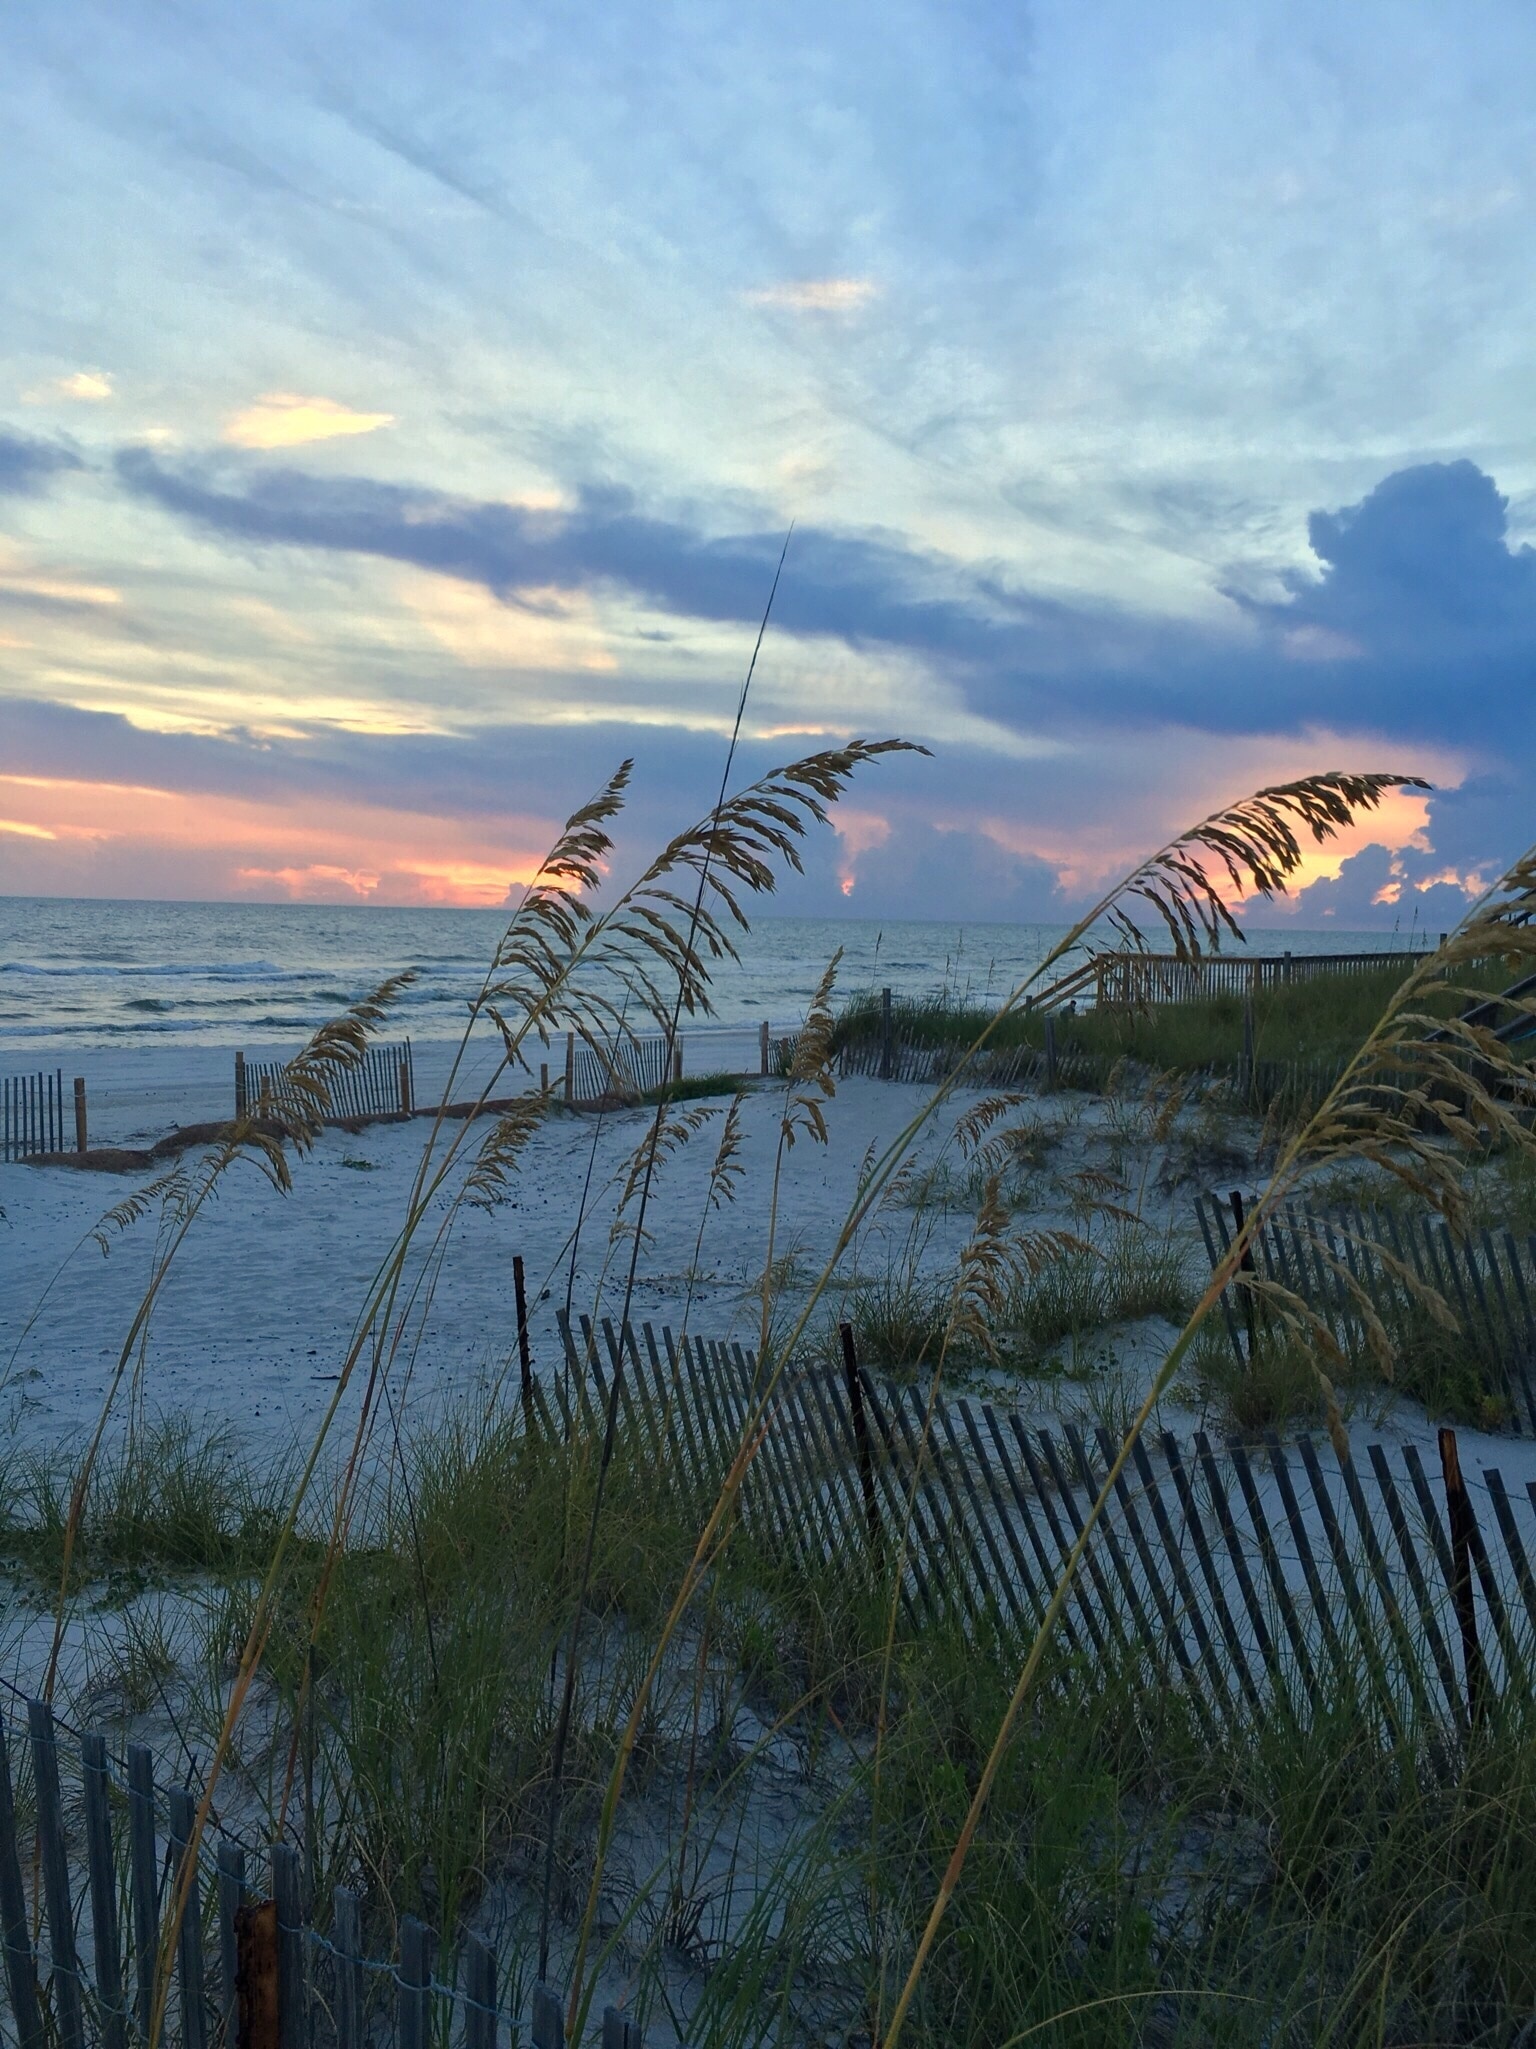 Sunset through the sea oats at Cape San Blas, Florida.  Beautiful beaches, very quite; a perfect place to come and relax.  